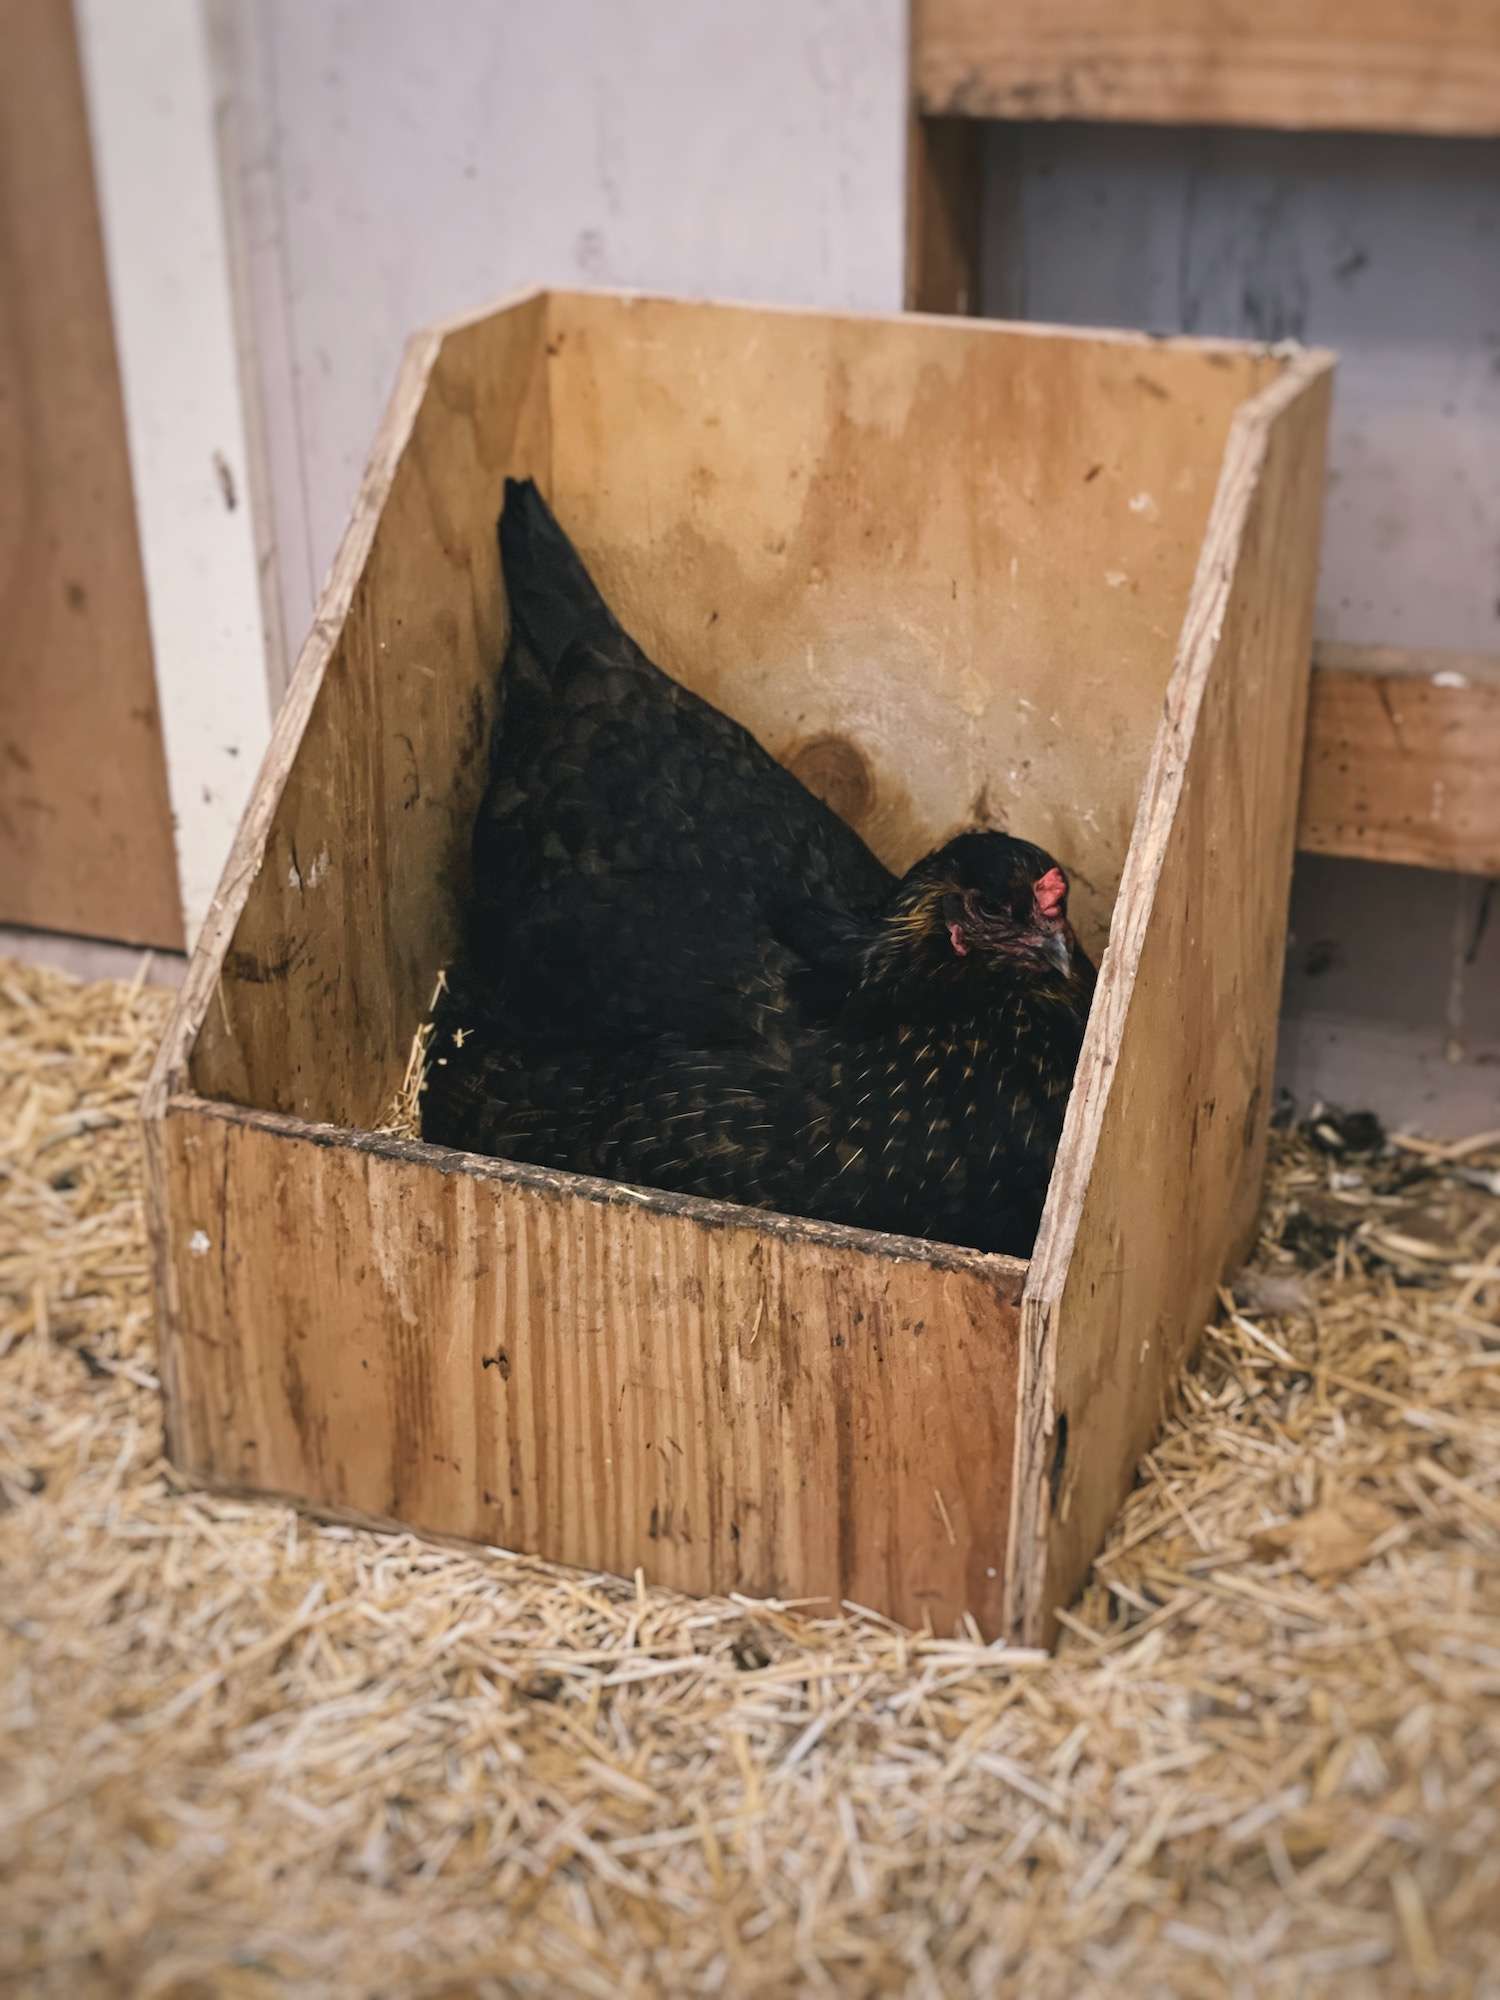 A dark colored hen sitting in a chicken nesting box that is perfectly sized for her